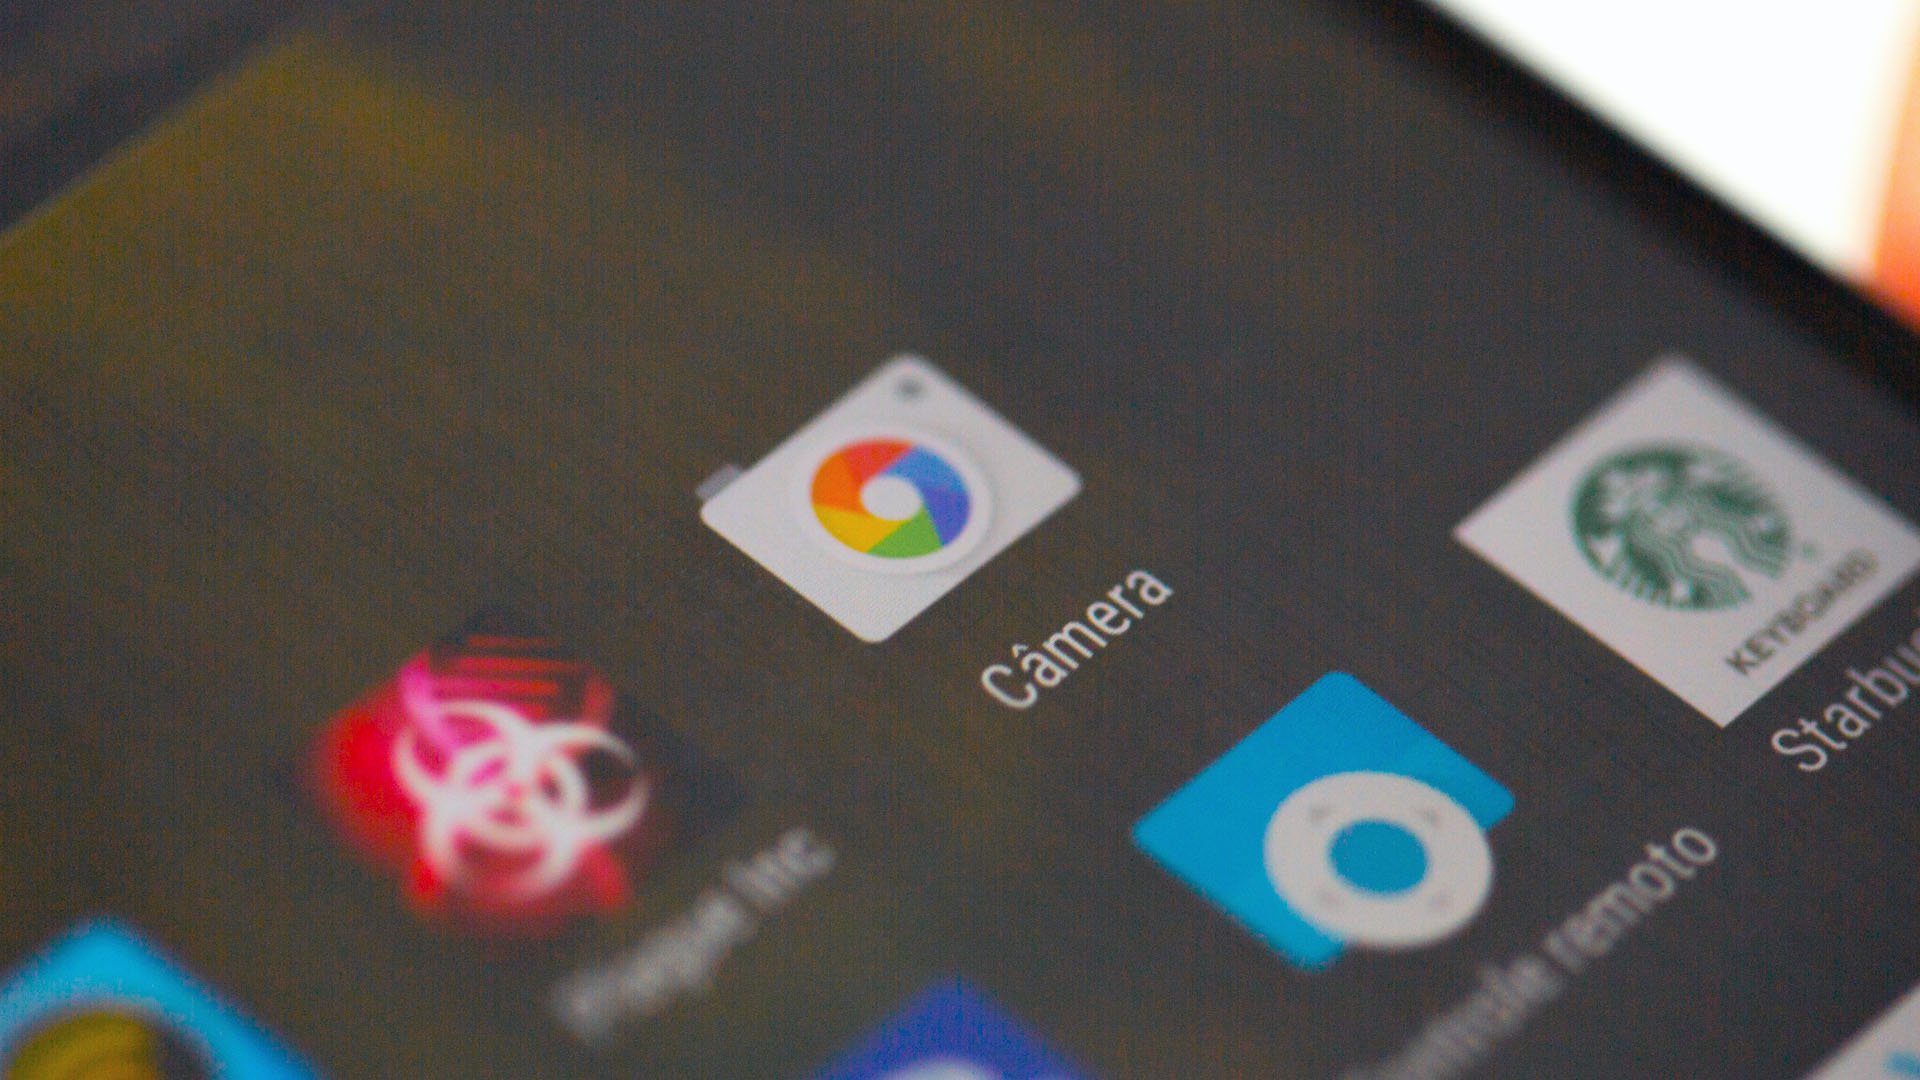 This feature promises to bring more quality to Google Camera images.